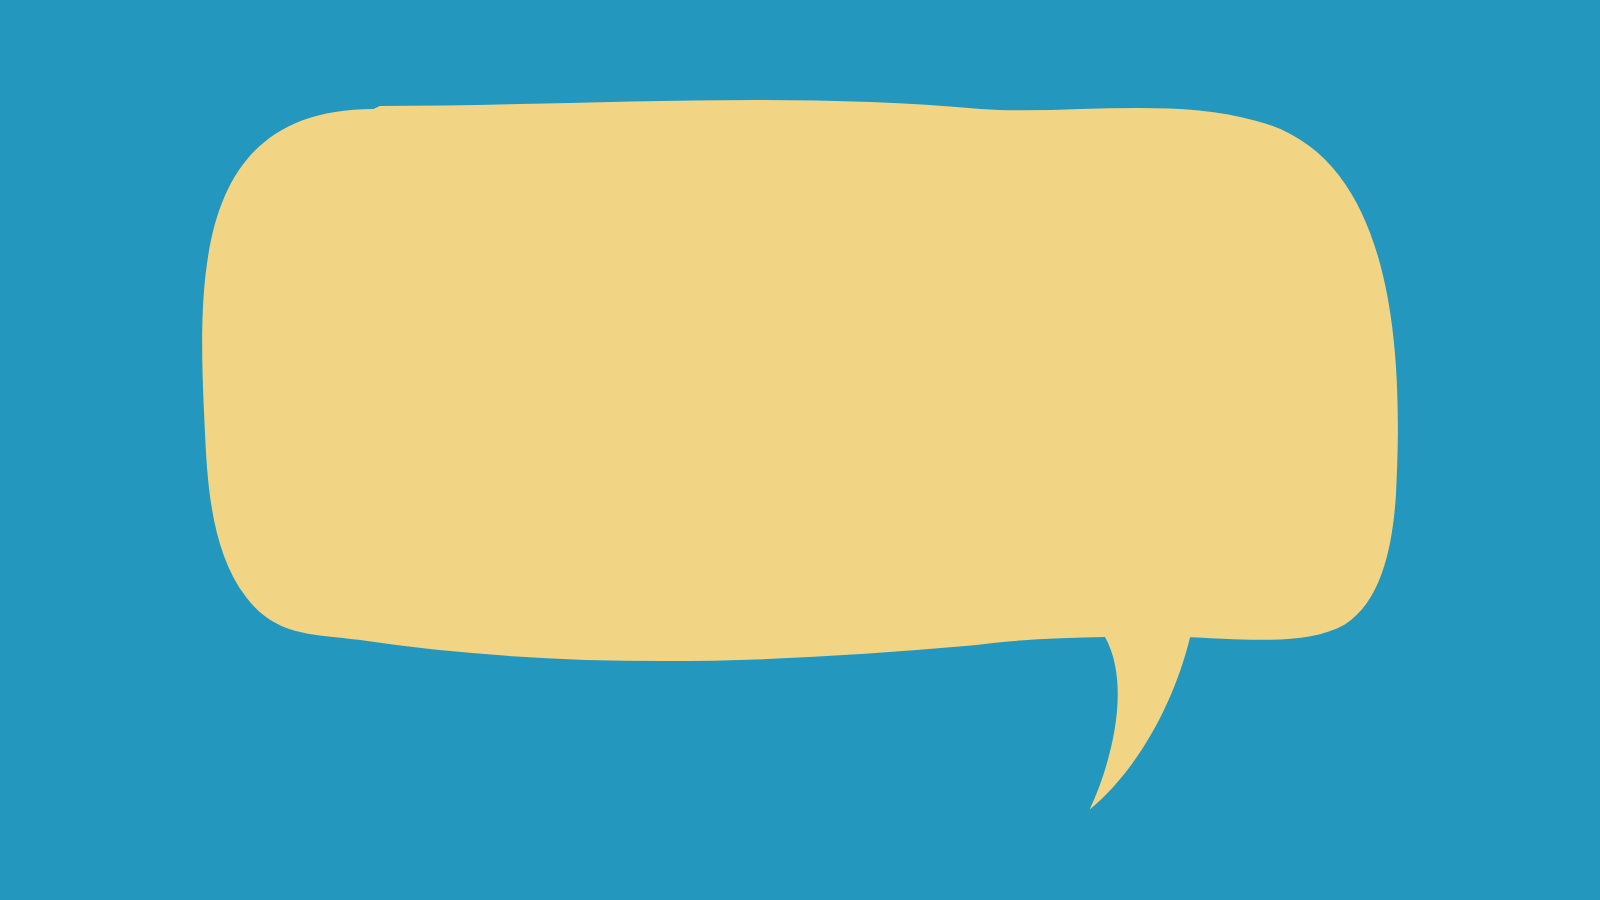 A yellow speech bubble against a blue background